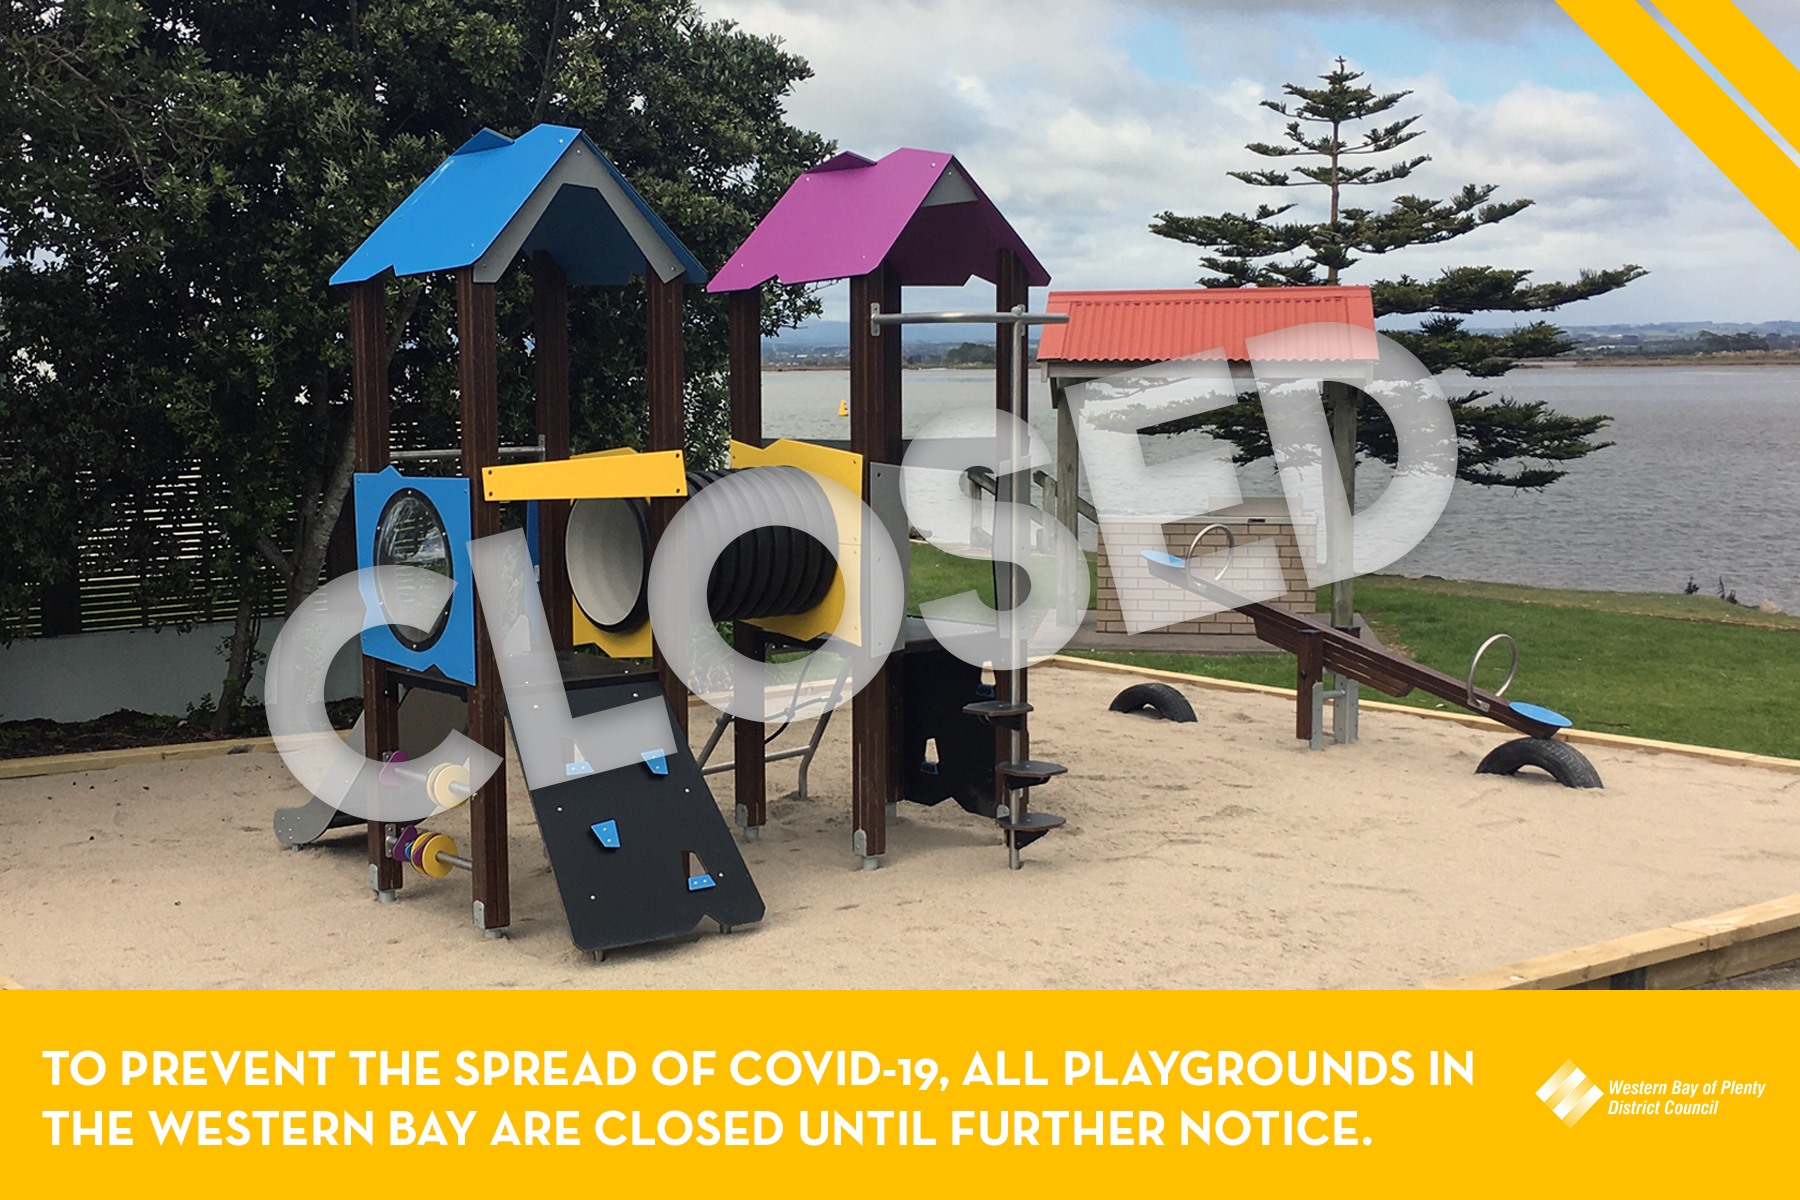 All playgrounds across the District are closed to prevent the spread of COVID-19